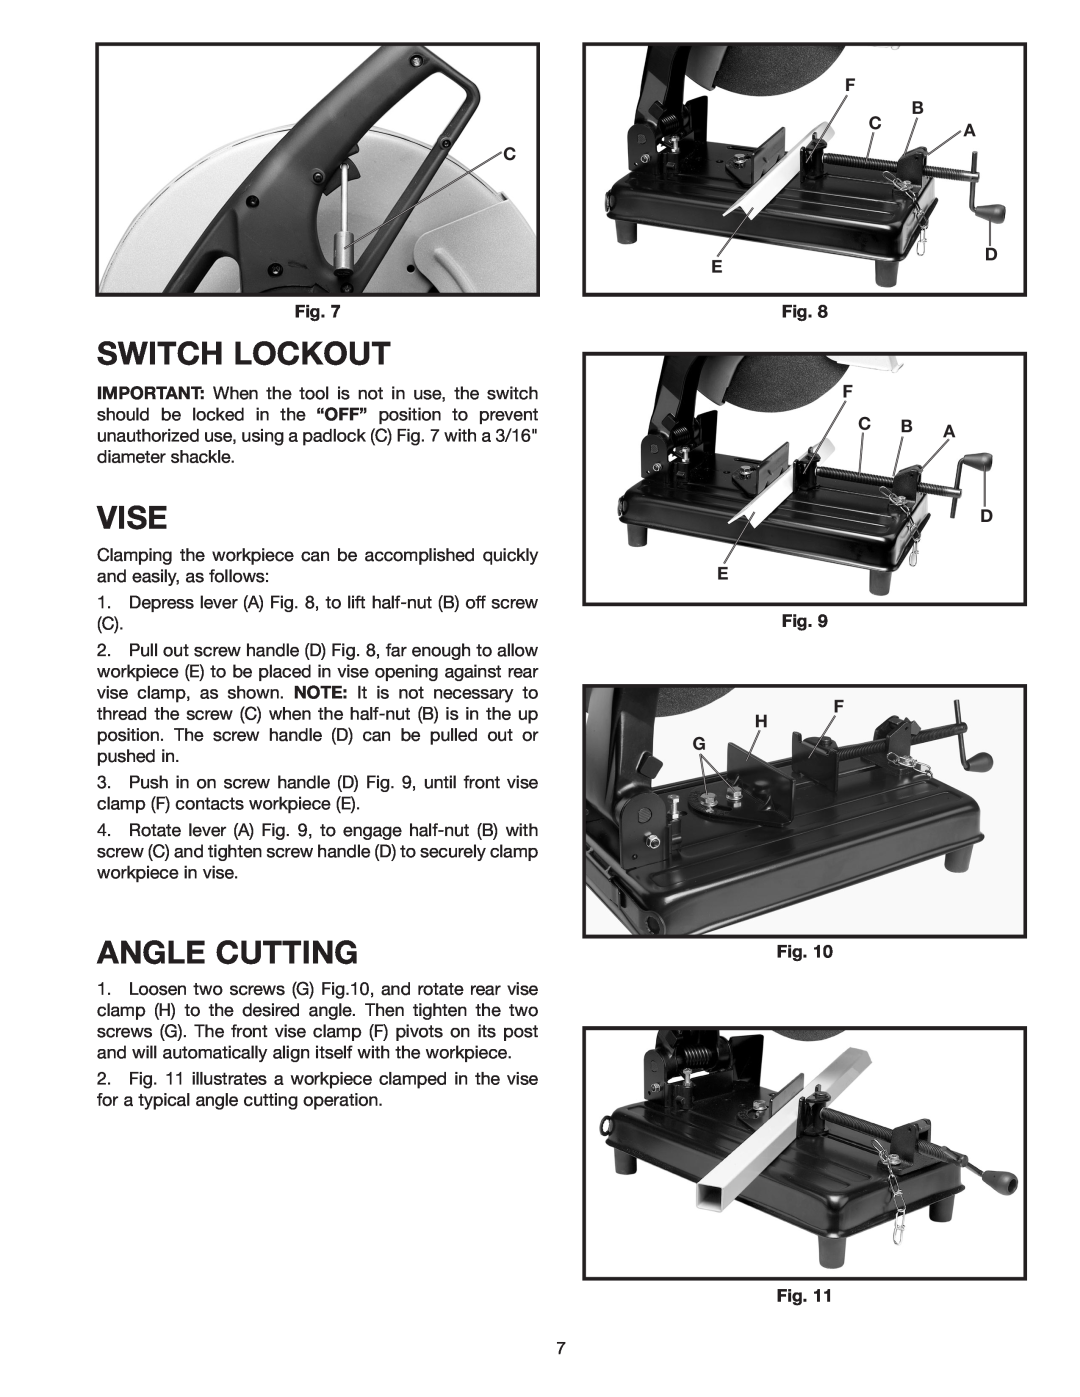 Porter-Cable 1400, 909516 instruction manual Switch Lockout, Vise, Angle Cutting, F B C A, F C B A D E, F H G 